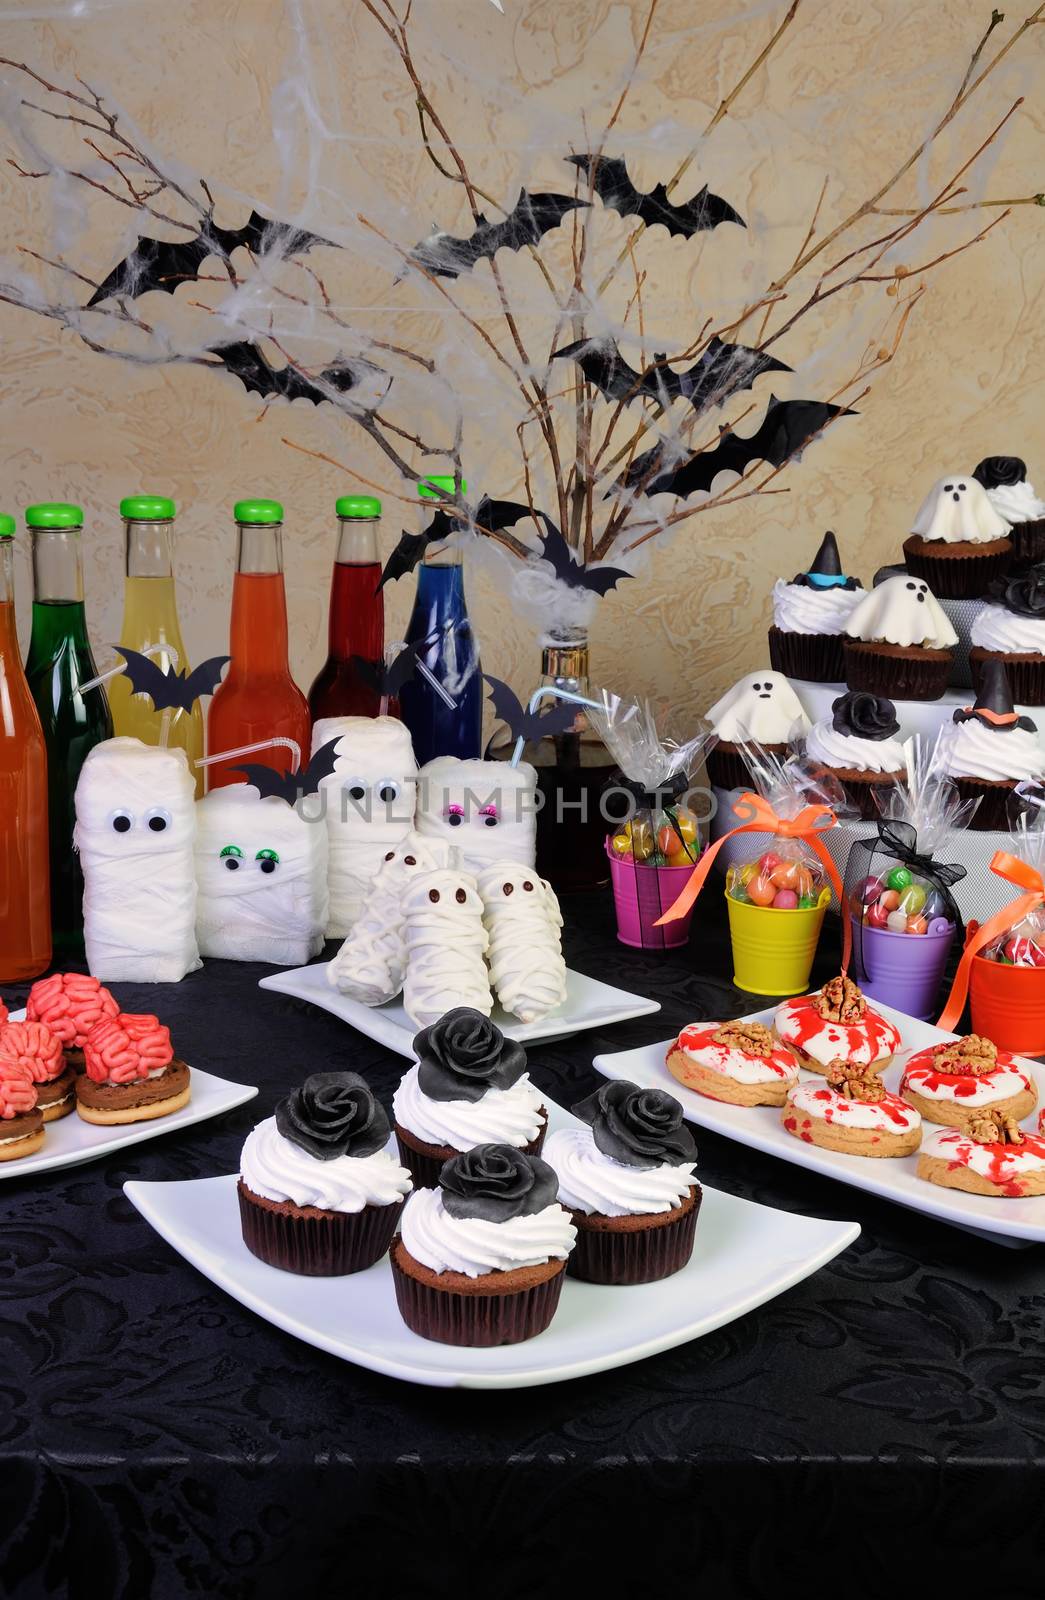 Sweets for Halloween by Apolonia